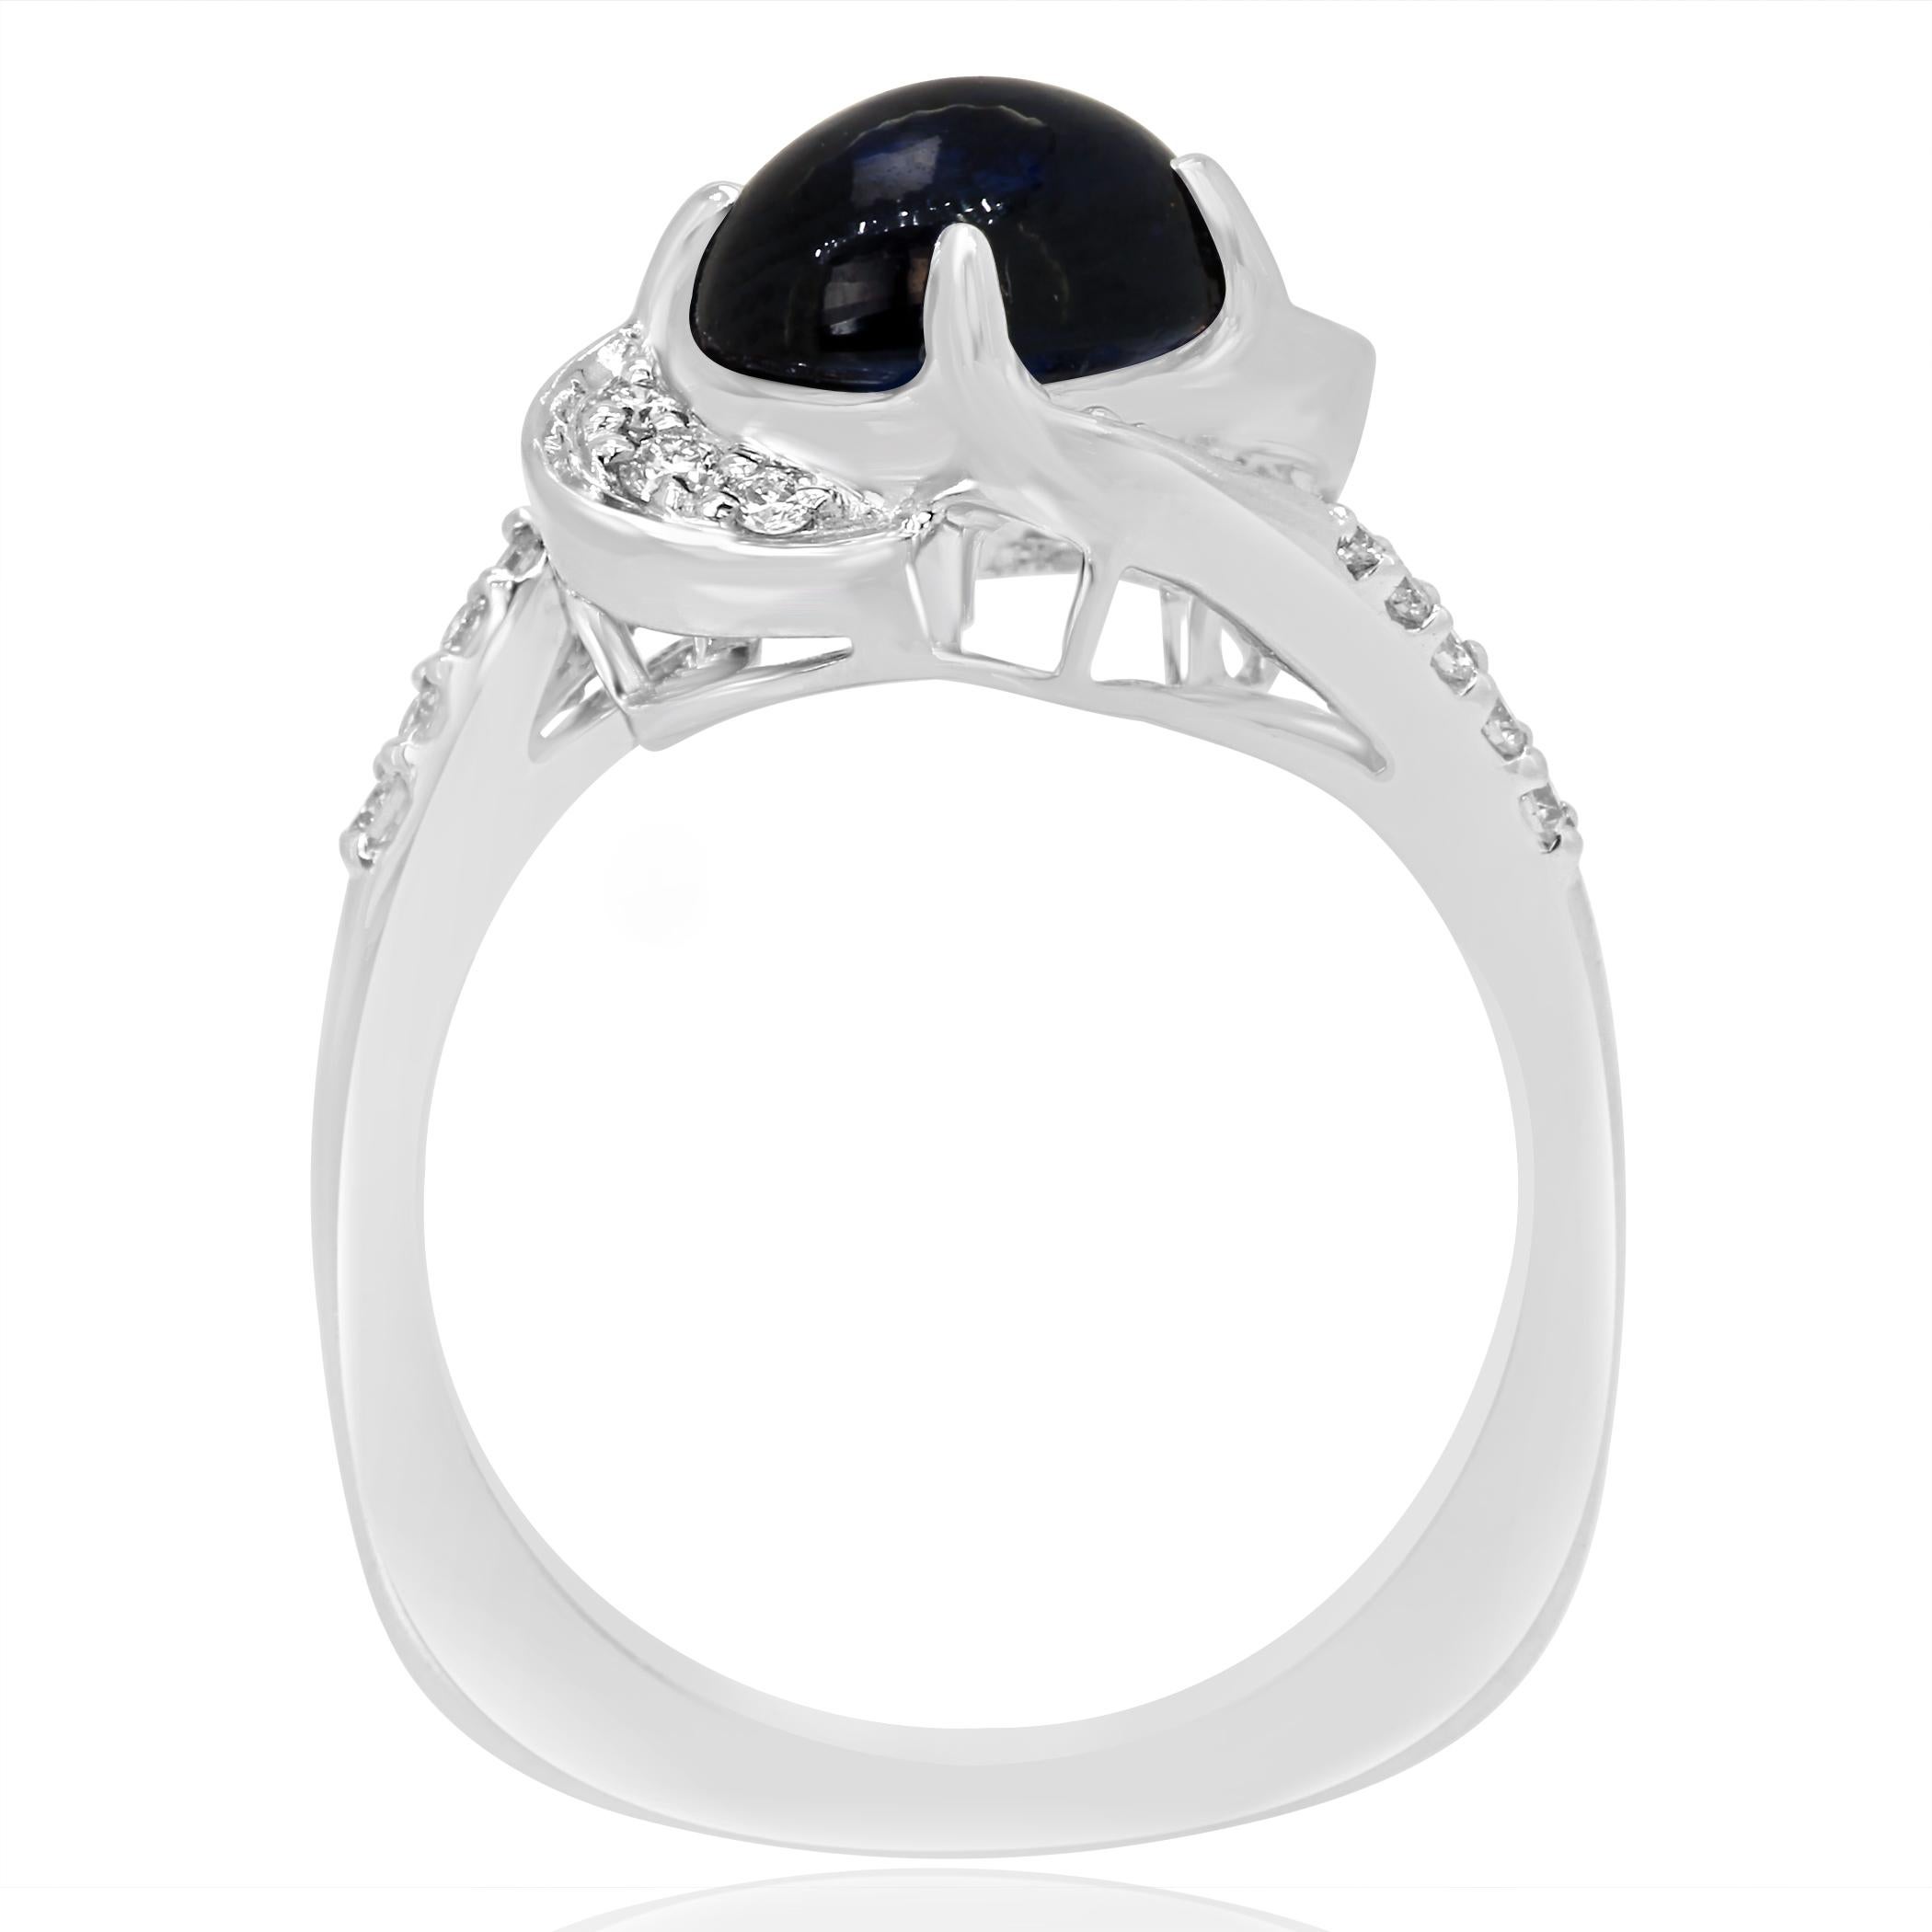 Women's or Men's GIA Certified 3.04 Carat Blue Sapphire Cabochon Diamond Halo Gold Cocktail Ring